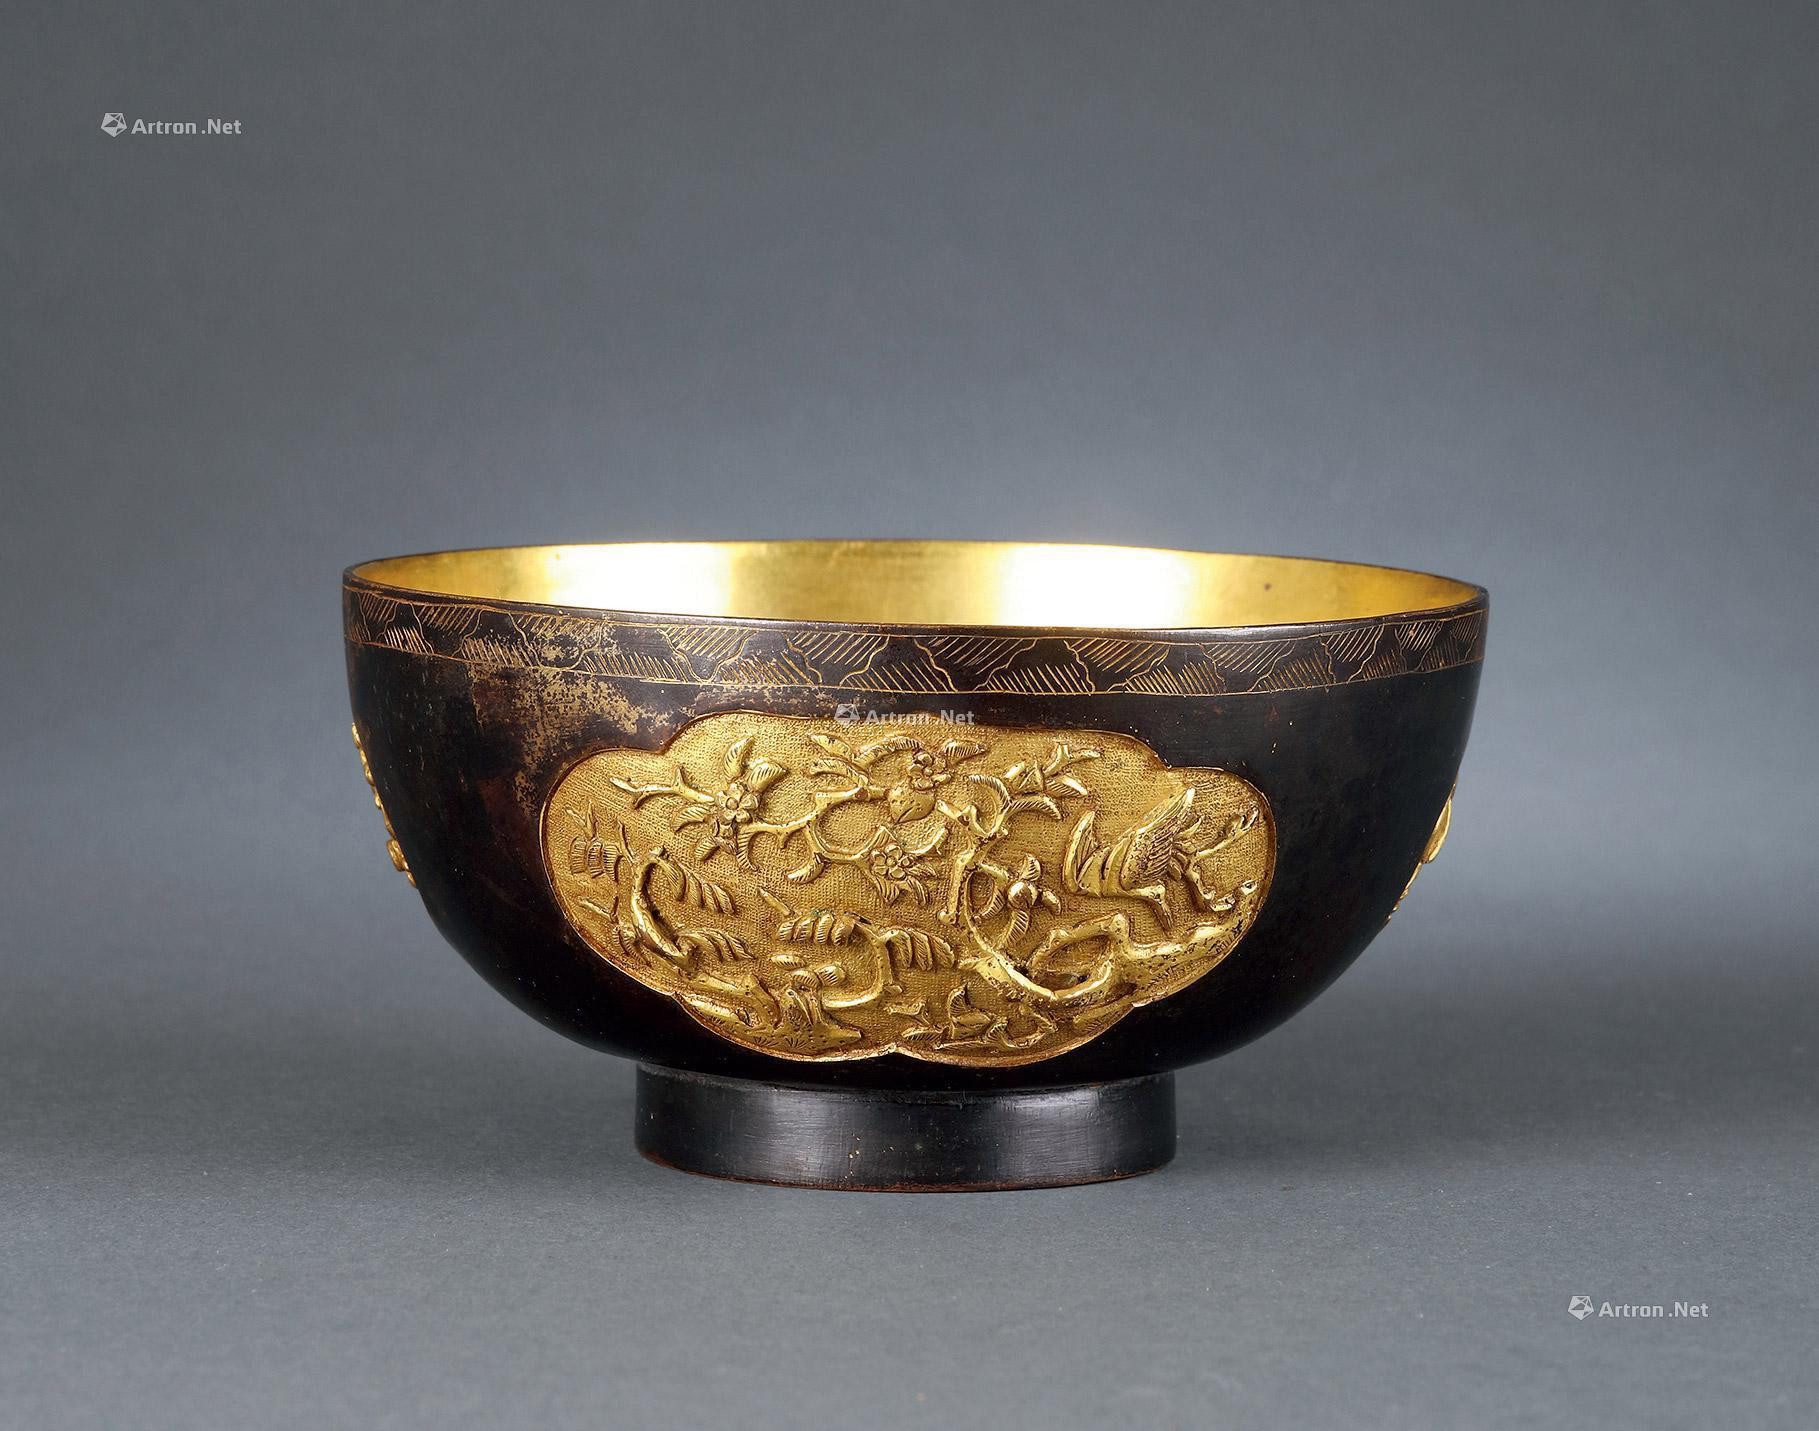 A GOLD-COPPER BOWL WITH DESIGN OF FLOWER AND BIRD